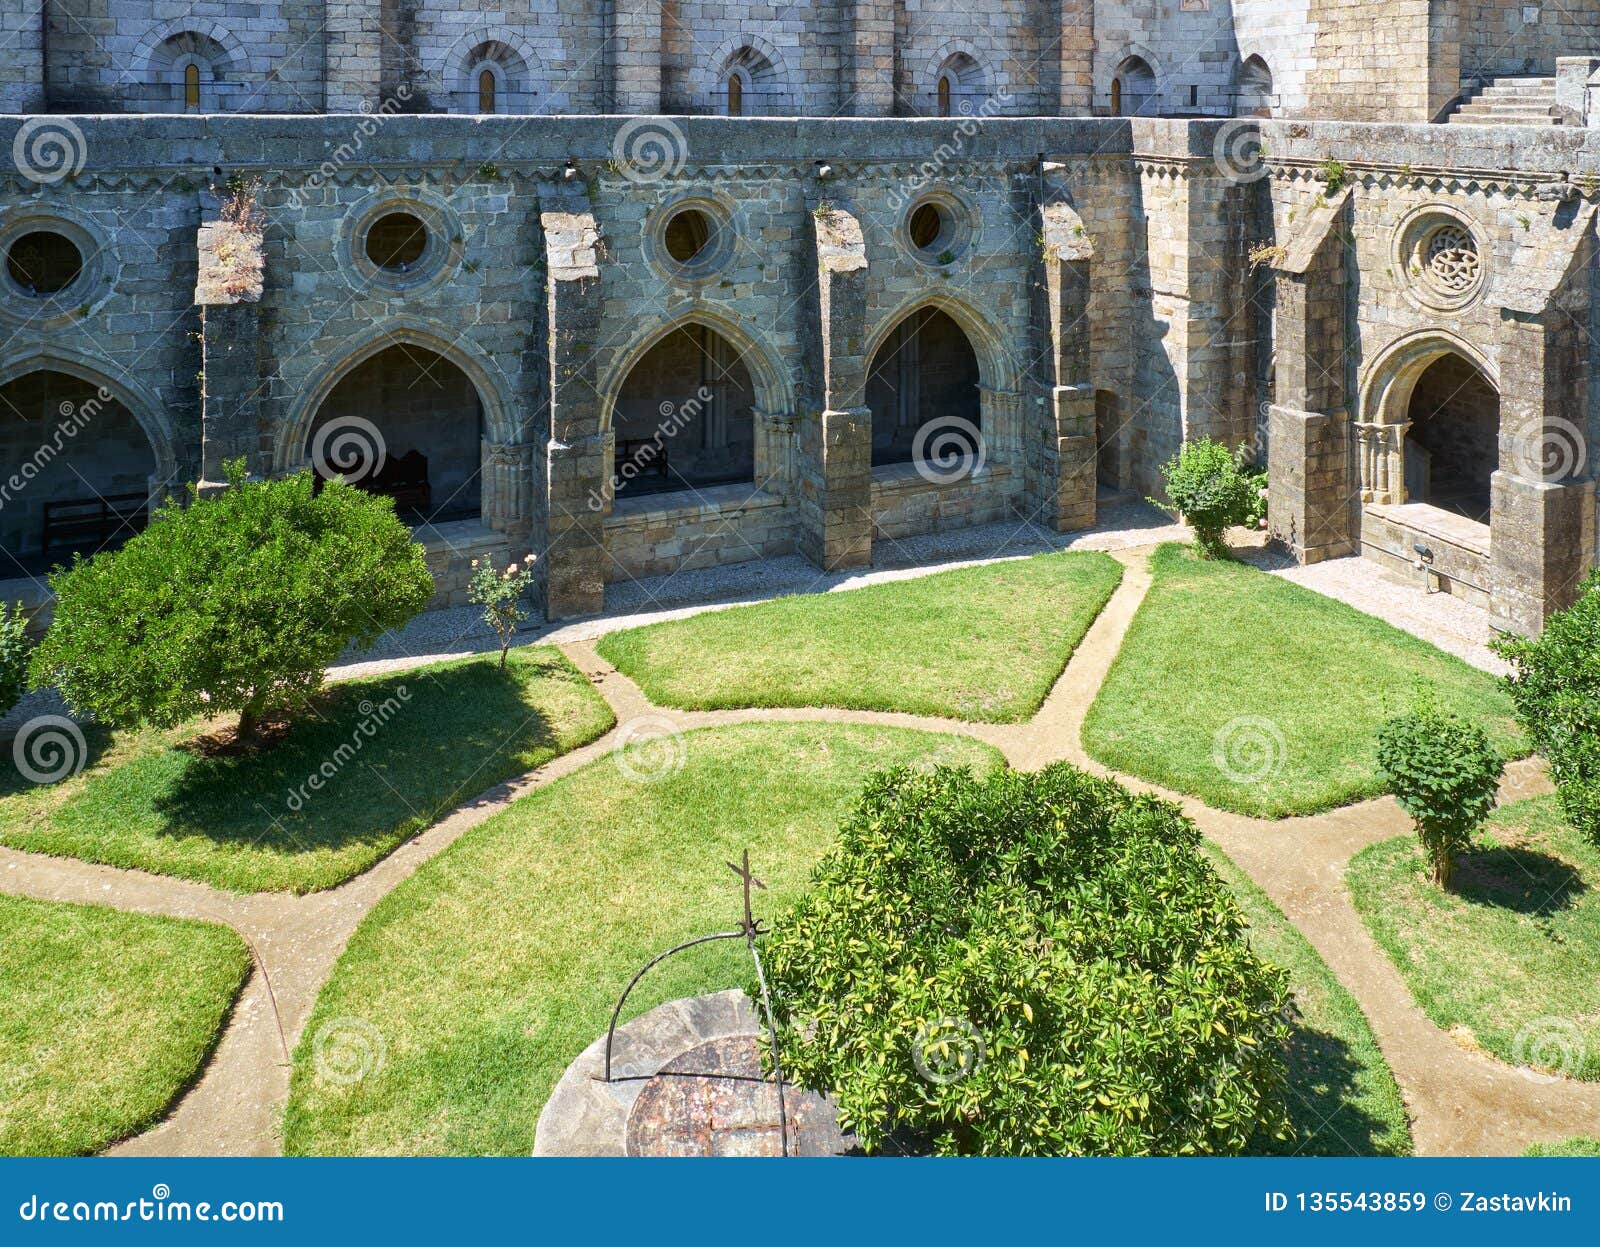 a cloister and the interior courtyard of cathedral (se) of evora. portugal